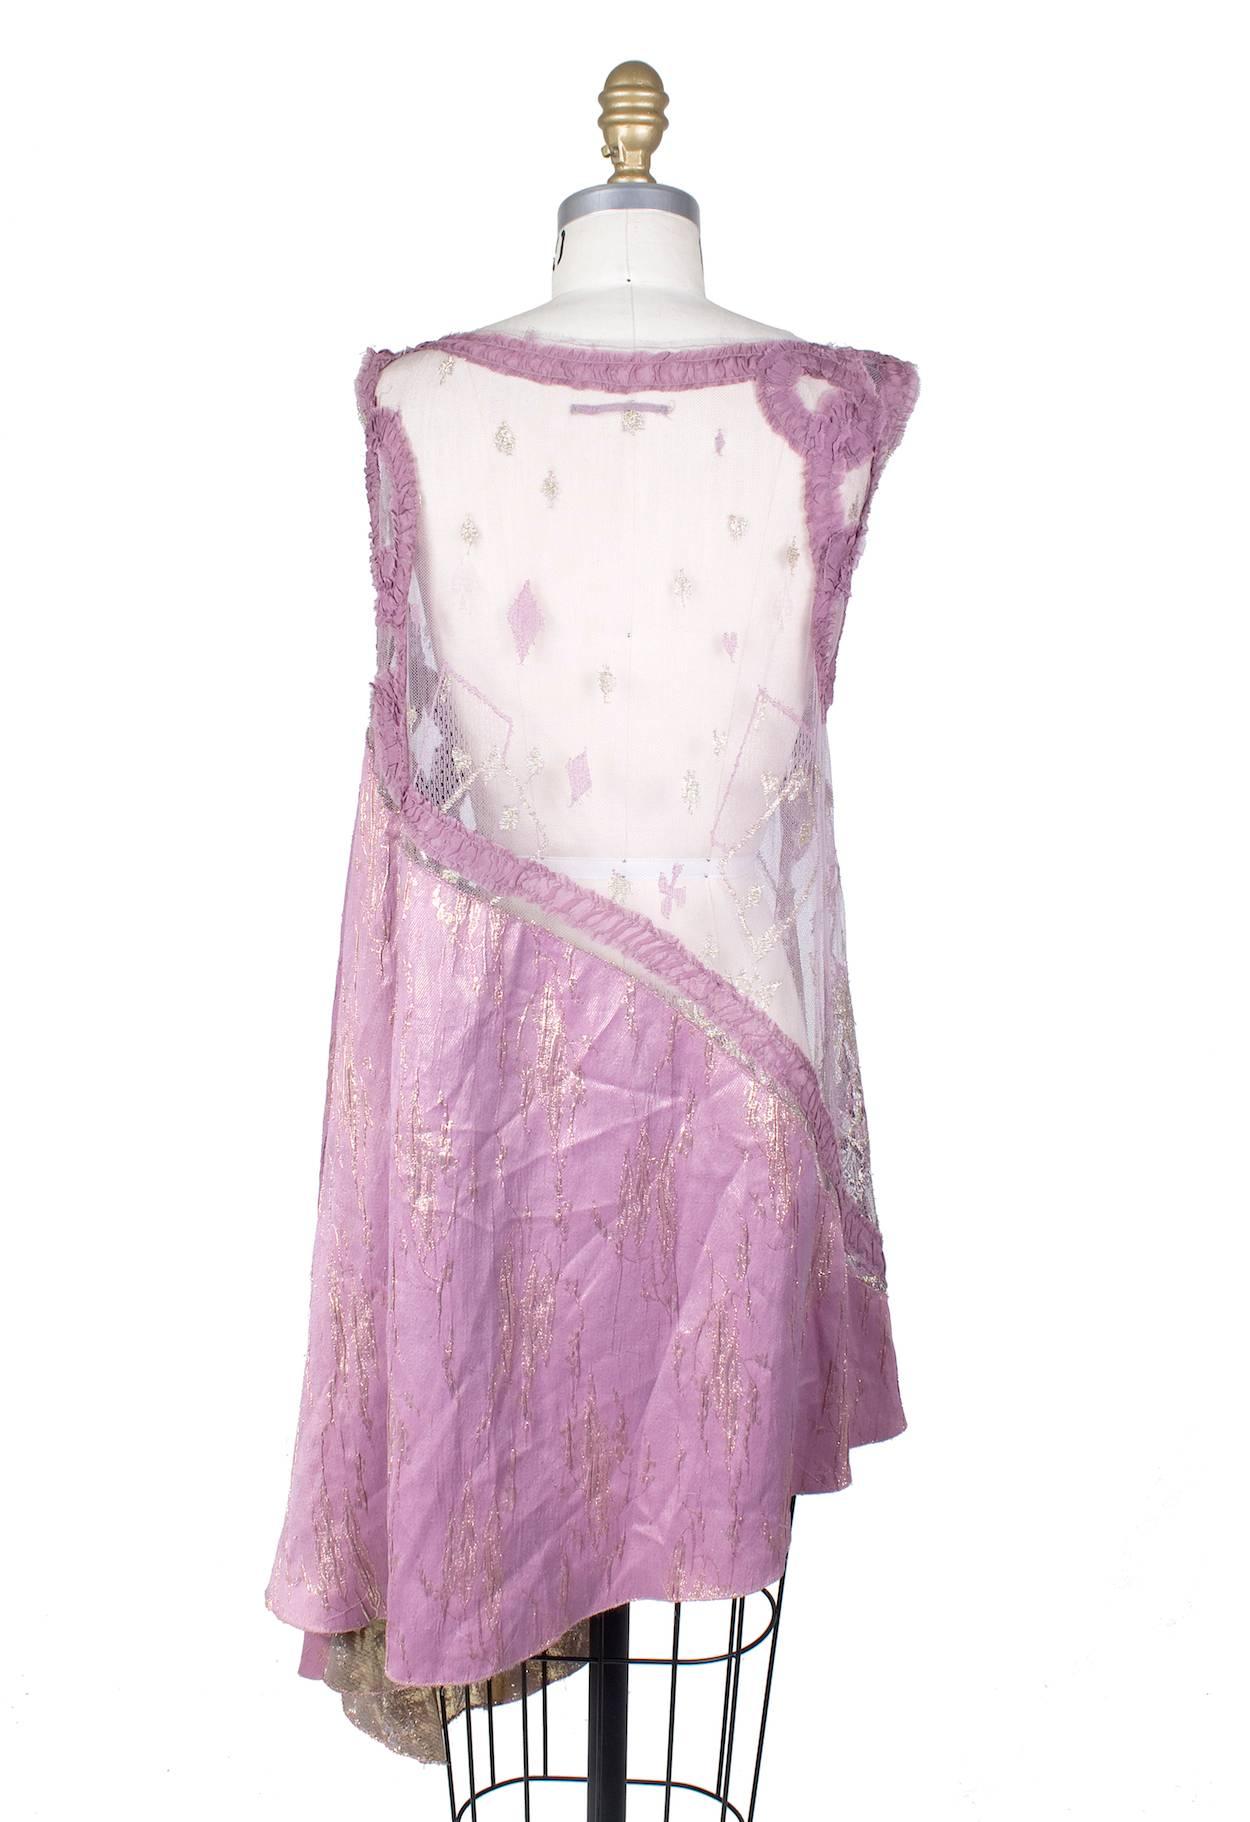 This is a top by Jean Paul Gaultier c. 2000s.  It features purple lace and sheer mesh with subtle gold detailing.  It is also long enough to be worn as a trapeze/tent style dress.  

15